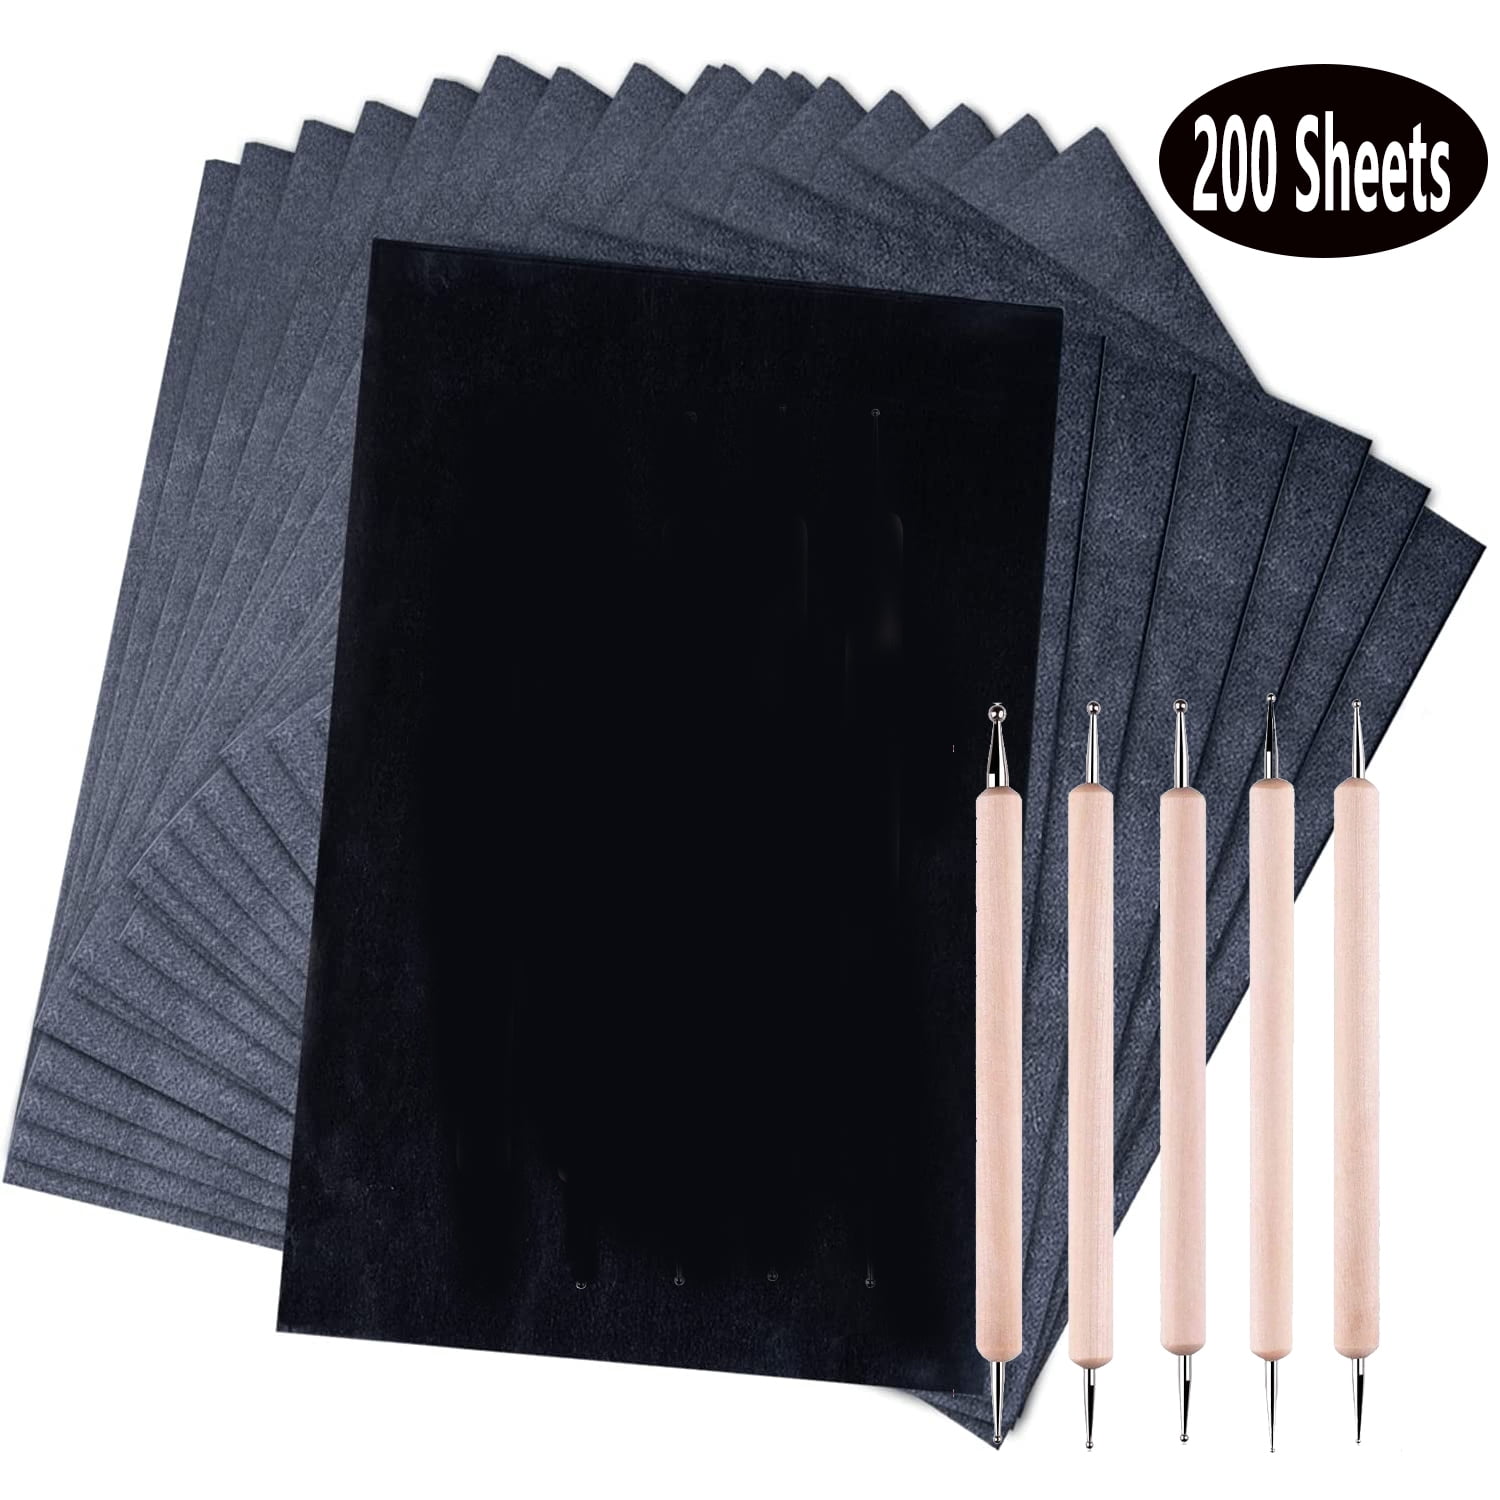 10-50X Tattoo Transfer Paper Stencil Carbon Thermal Tracing Paper for  Tattooing